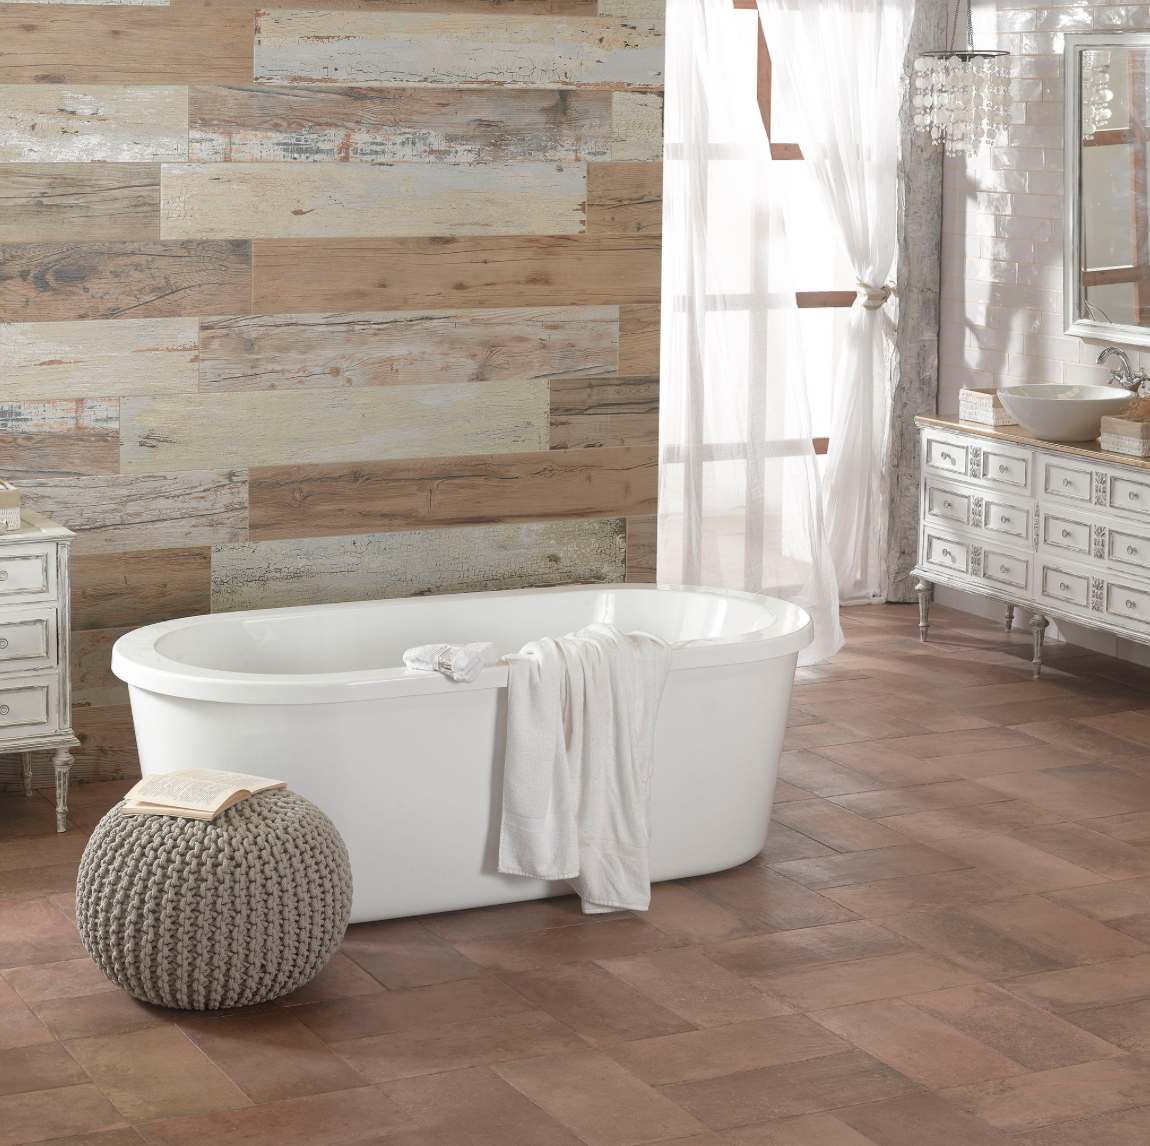 Why we Love tiles, and you should too!